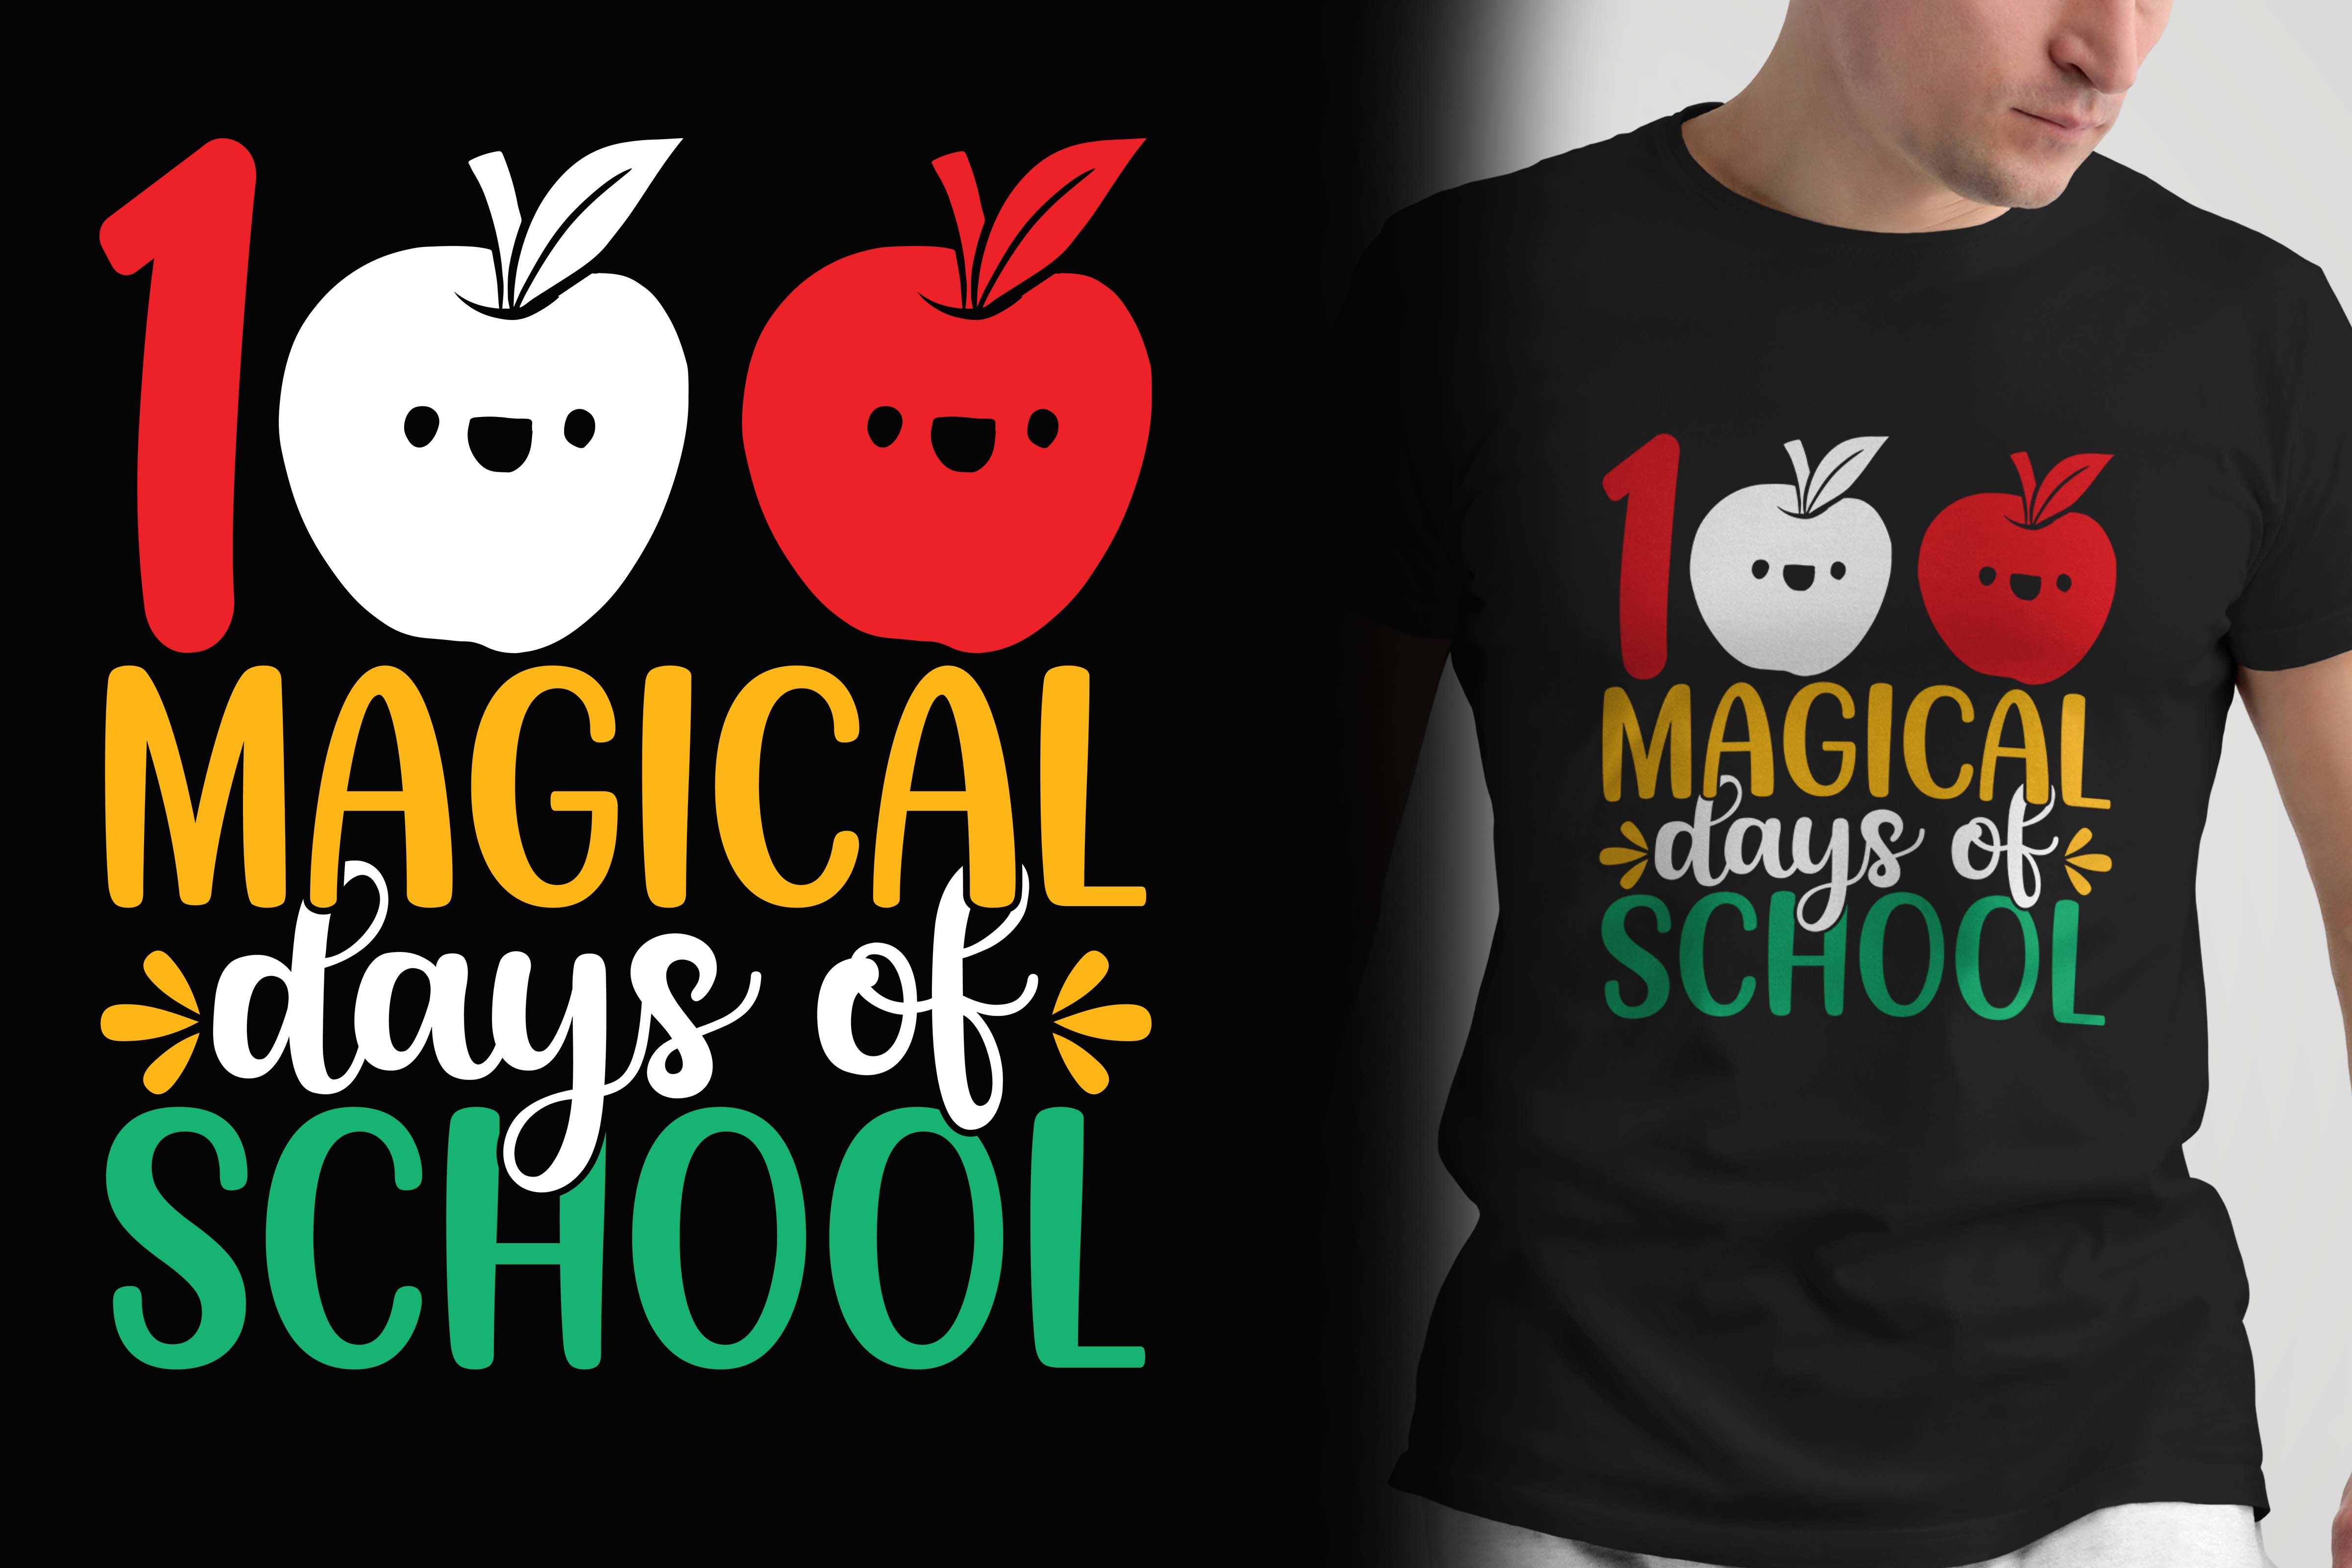 100 magical days of school 668